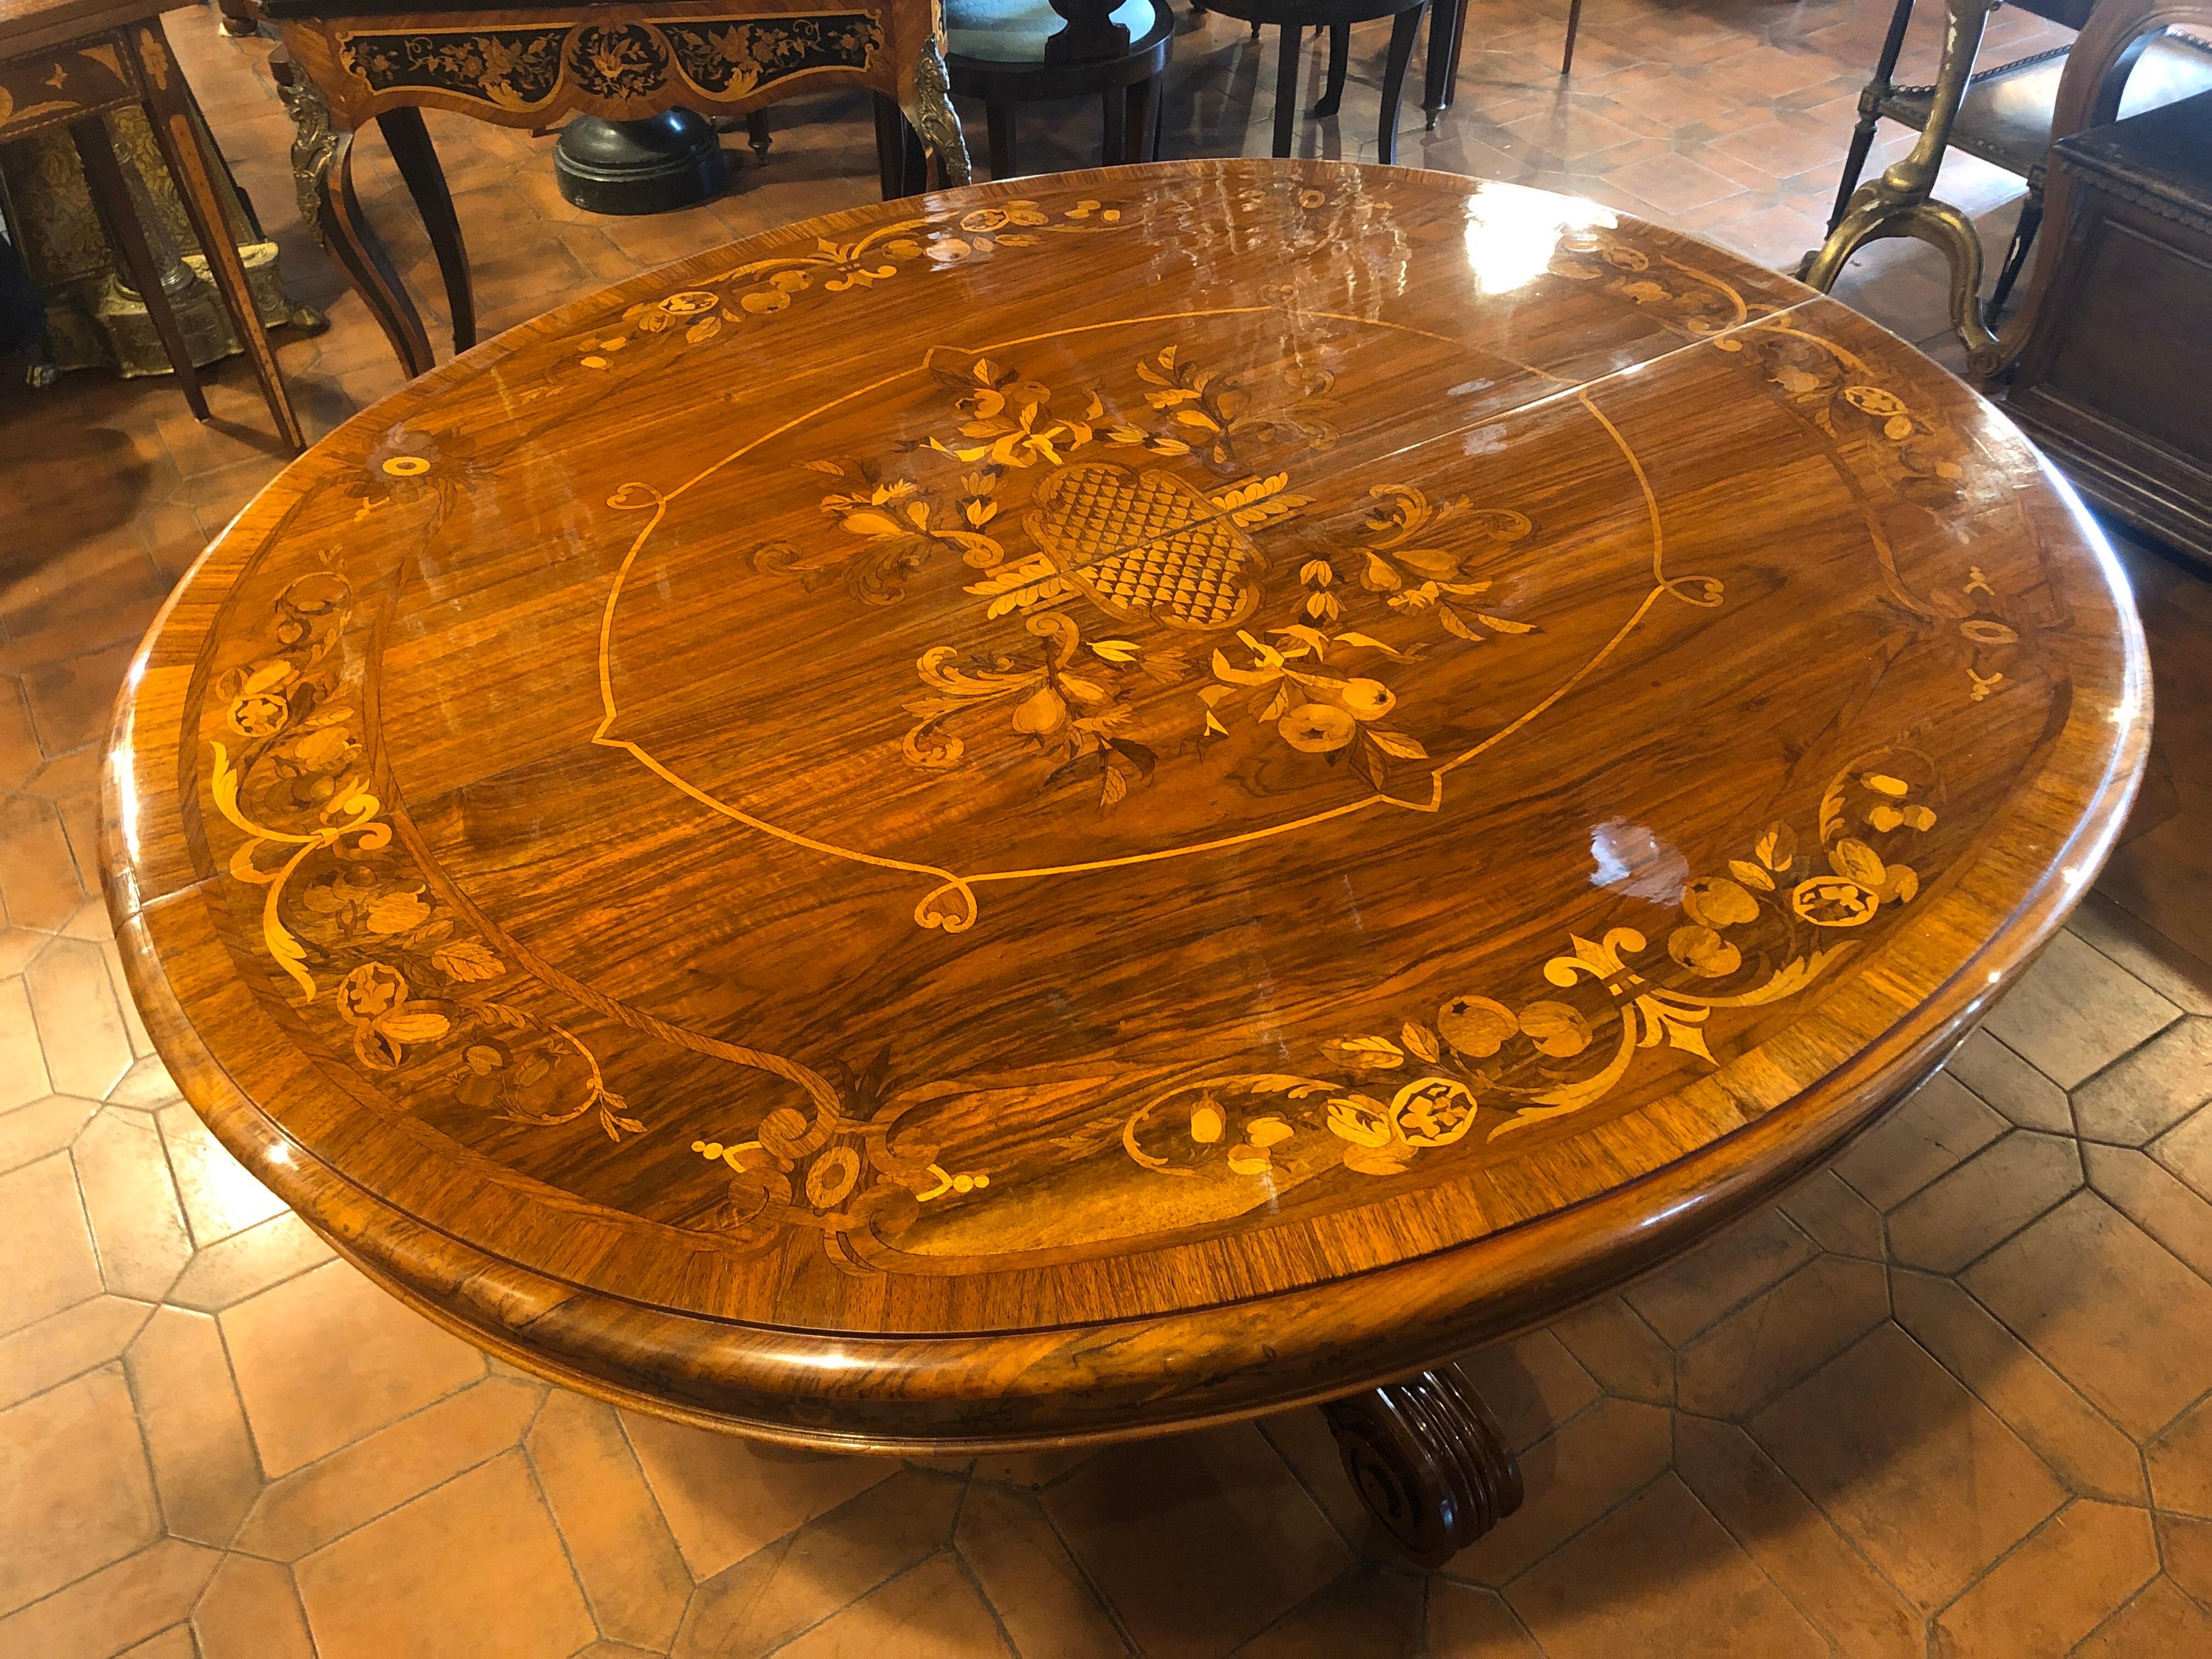 French extendable table, a work of art, completely inlaid on the top, on the edge and on the legs. Louis Philippe period, in walnut wood and inlaid in fruit woods with floral motifs. Table with soft lines and the inlay not being in contrast remains